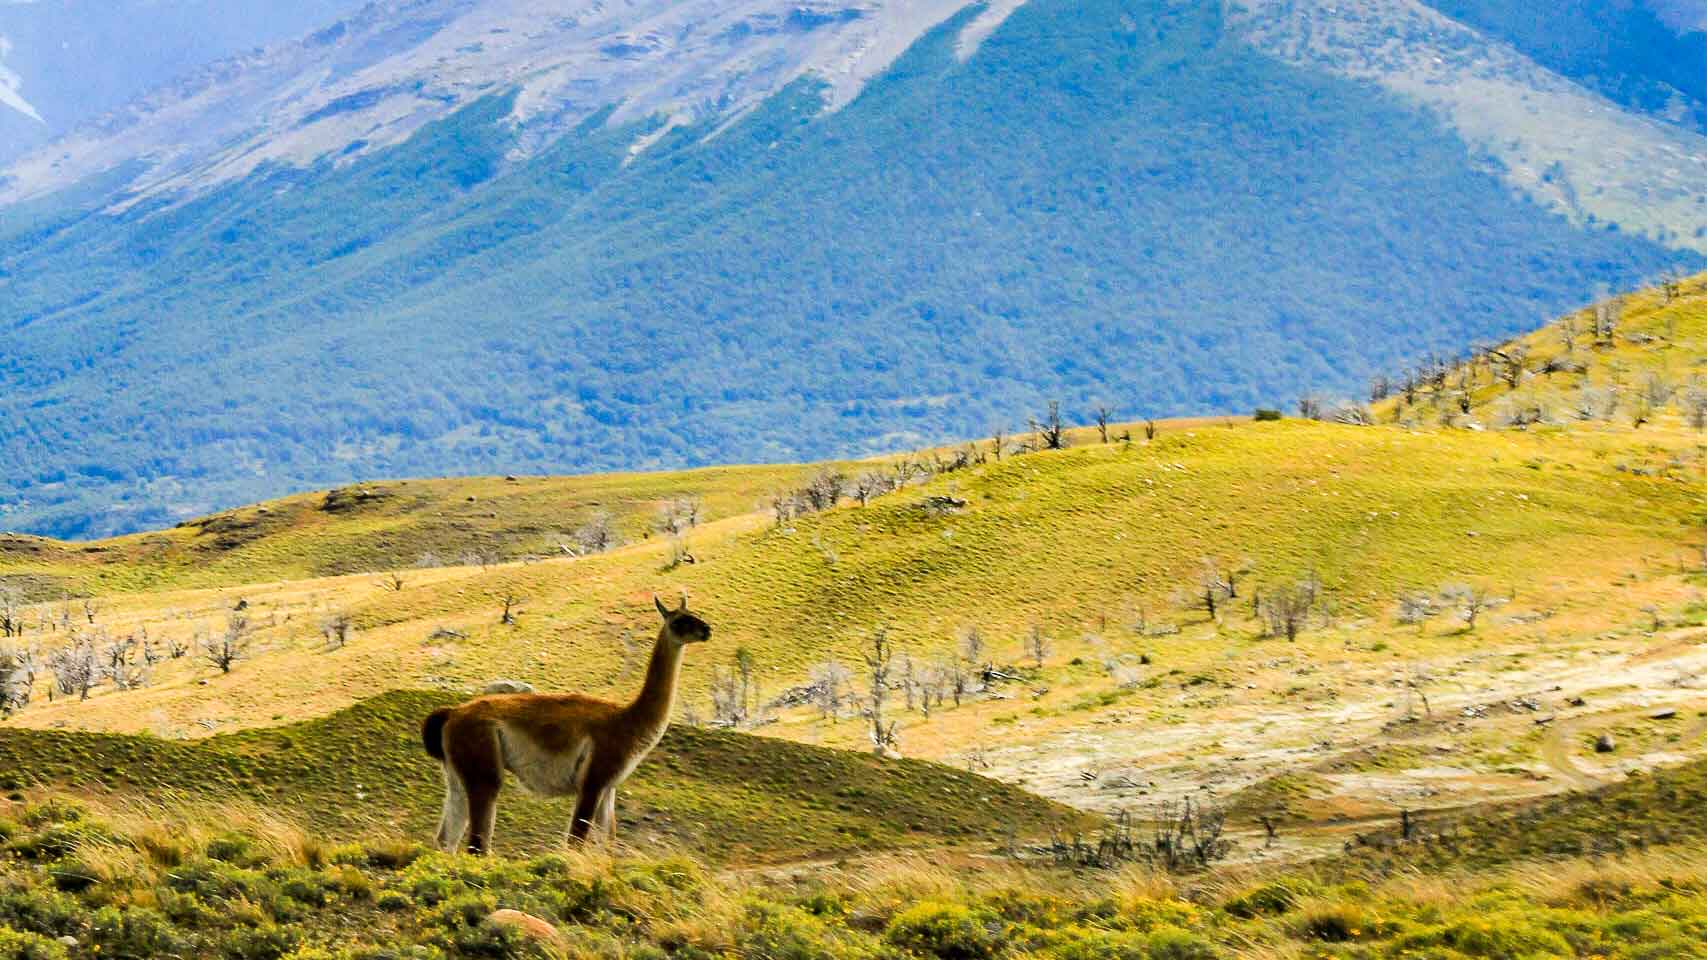 Llama standing on grass covered hills in front of the Torres del Paine with a cloud covered sky. Patagonia, Chile